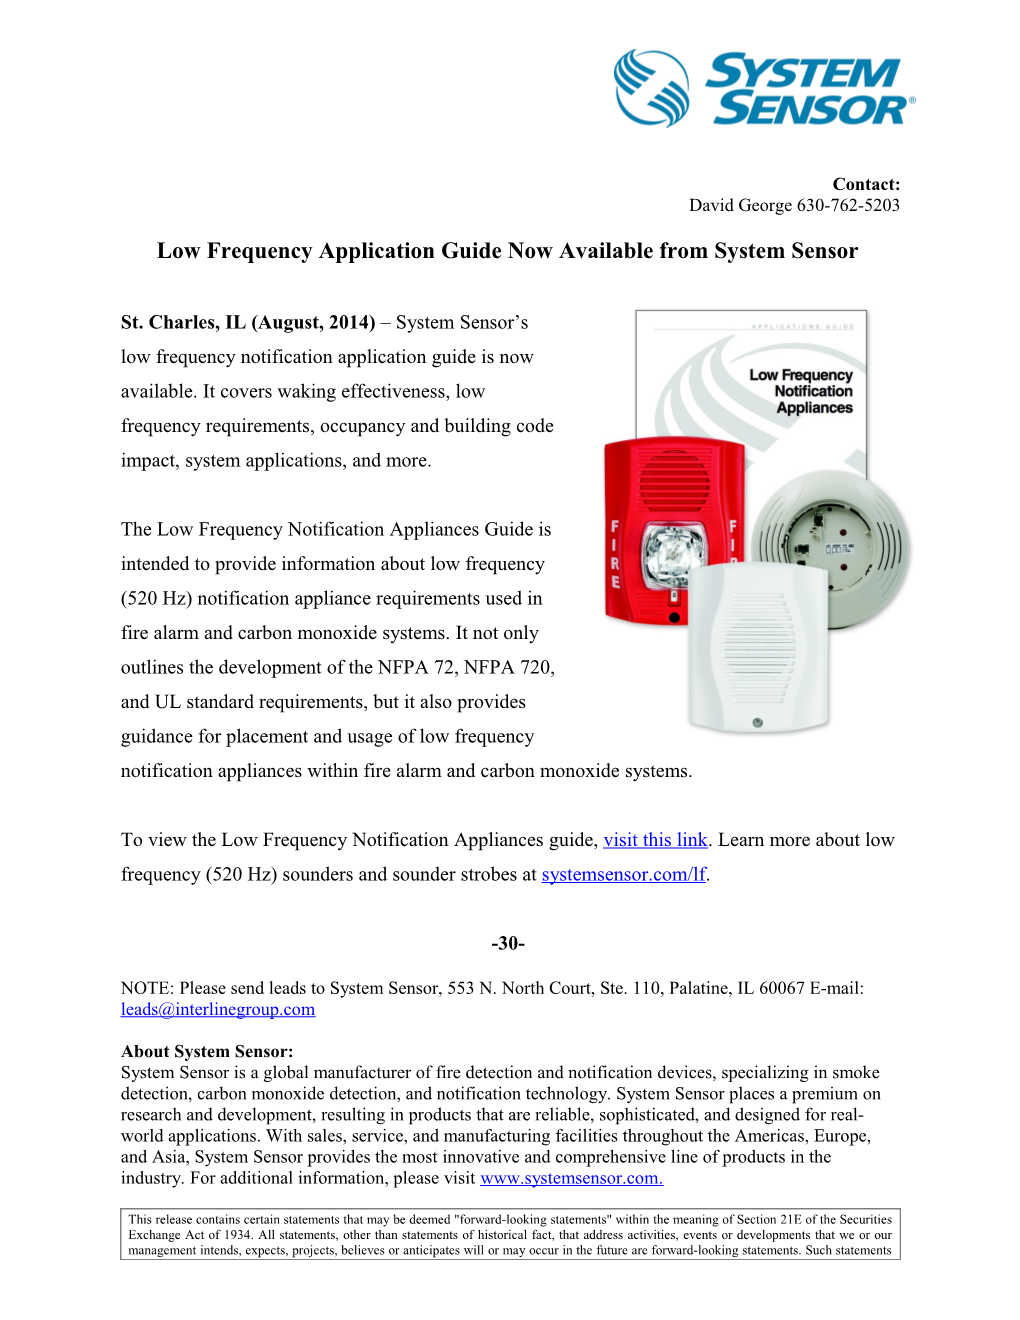 Low Frequency Application Guide Now Available